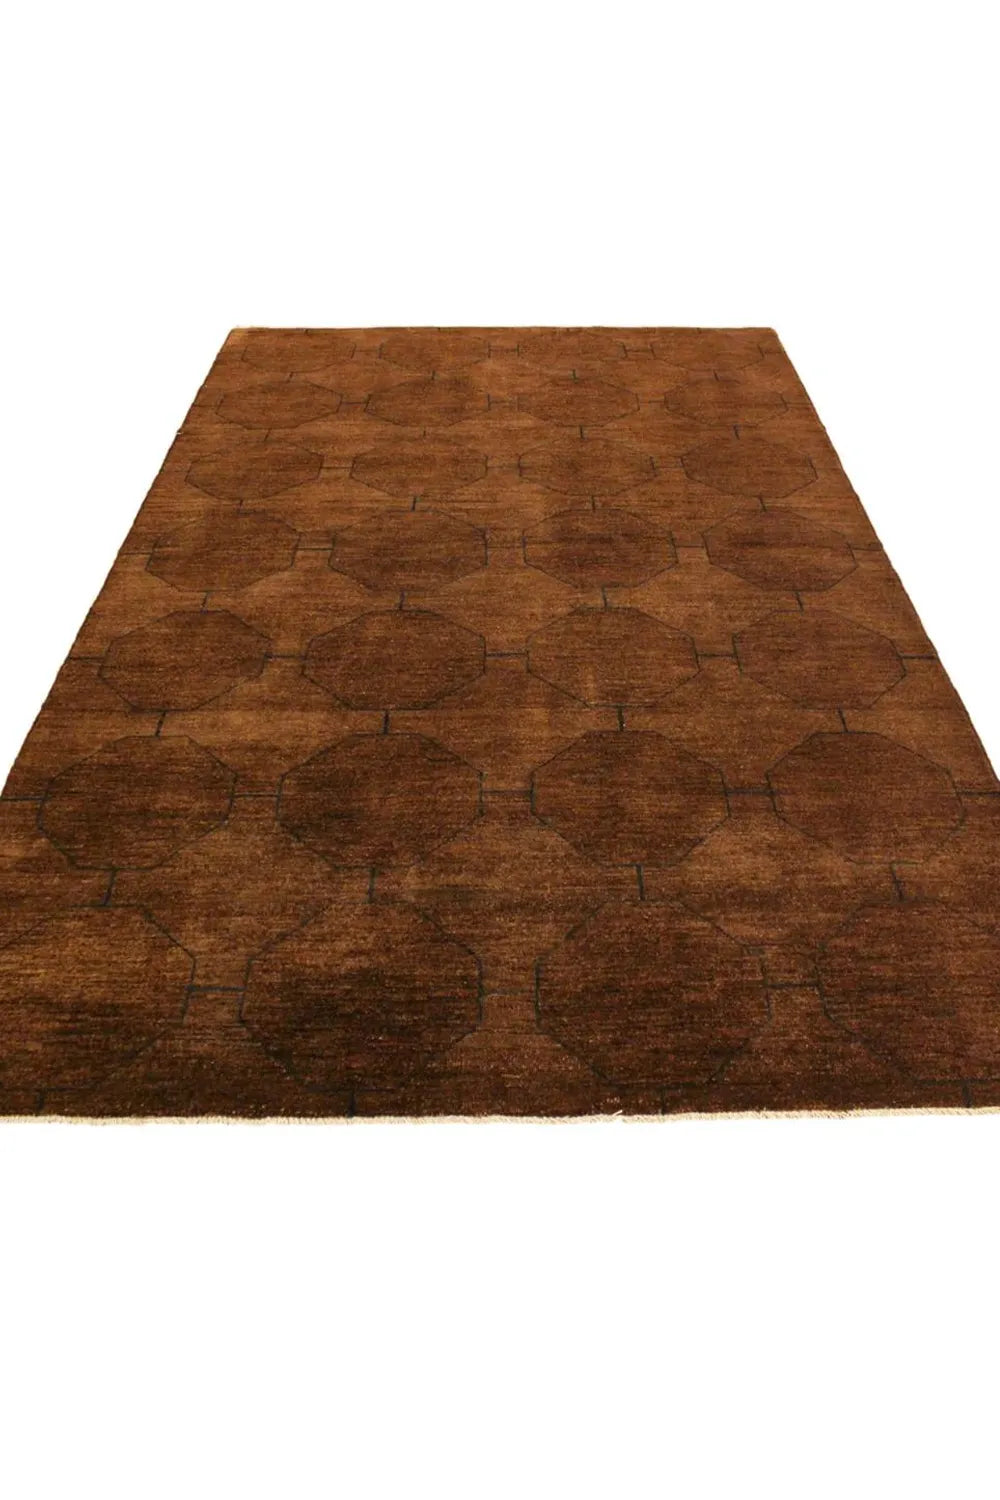 Chic Overdyed Brown Entryway Rug, Welcoming in 3x5 Size